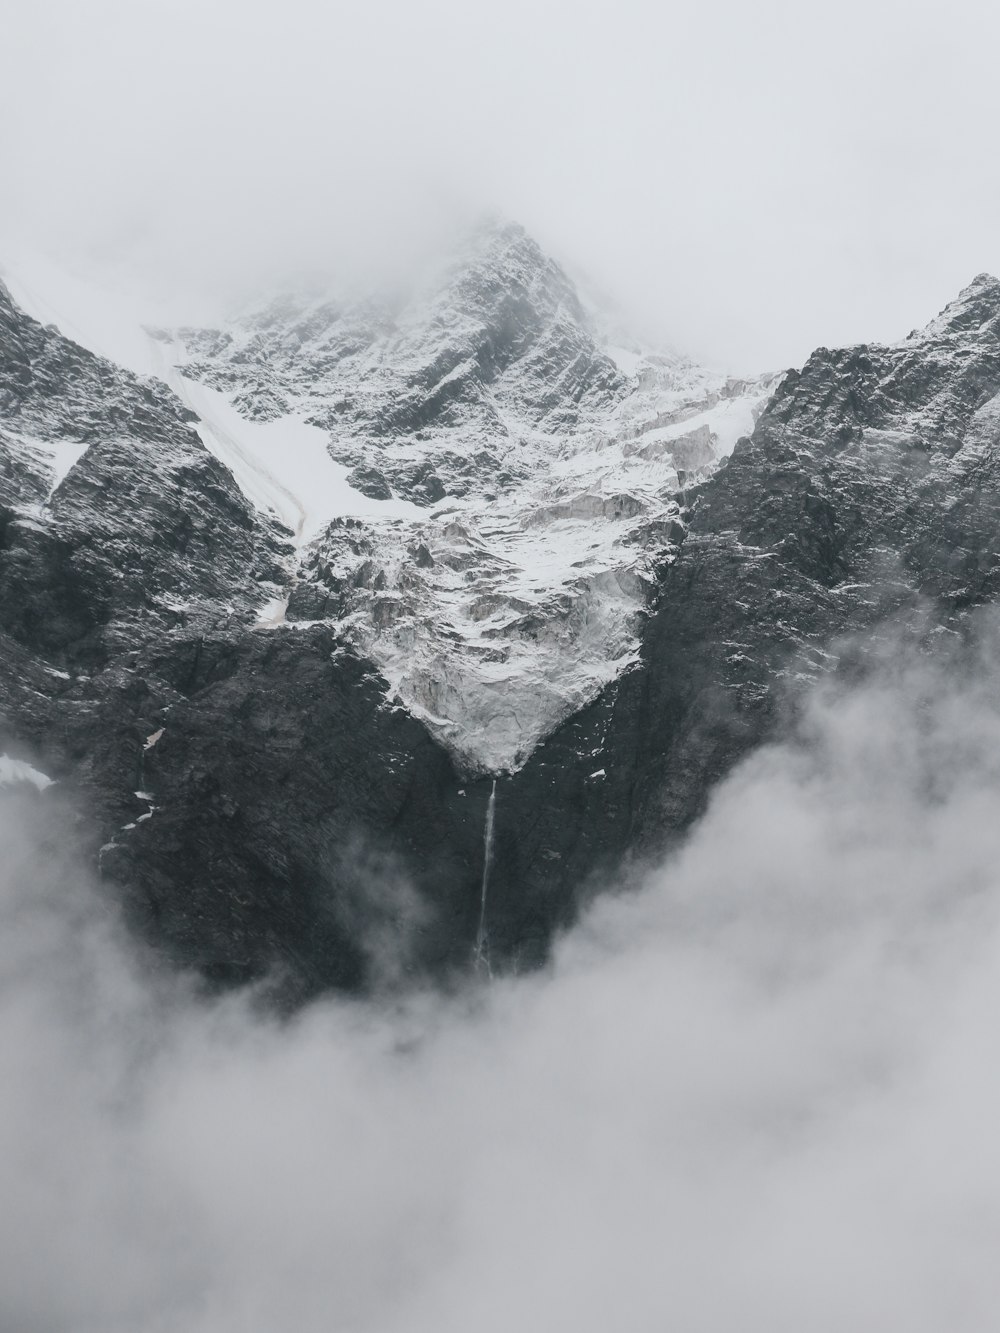 a mountain covered in snow surrounded by clouds